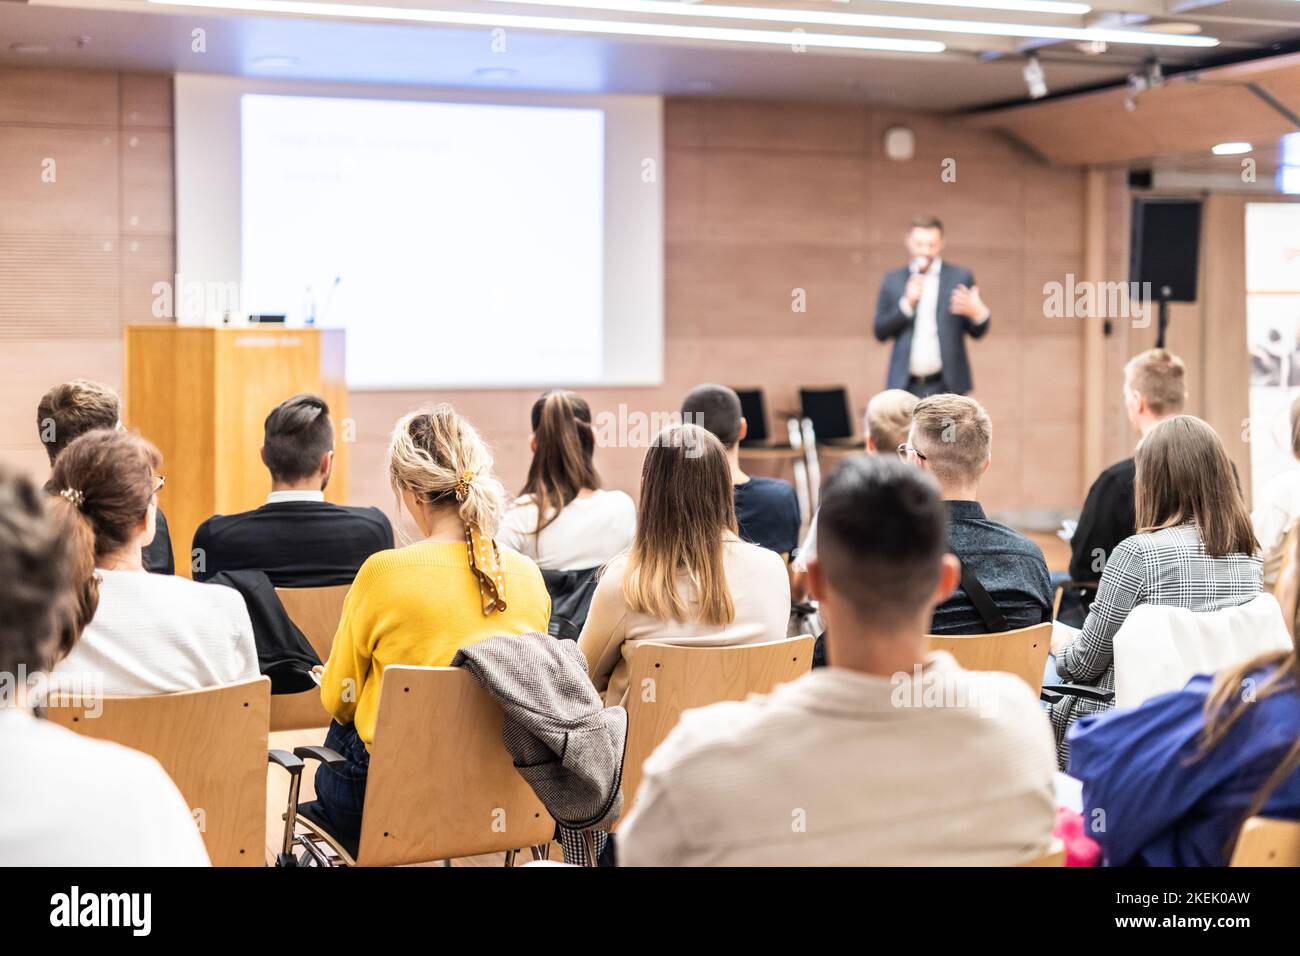 Speaker giving a talk in conference hall at business event. Rear view of unrecognizable people in audience at the conference hall. Business and entrepreneurship concept Stock Photo